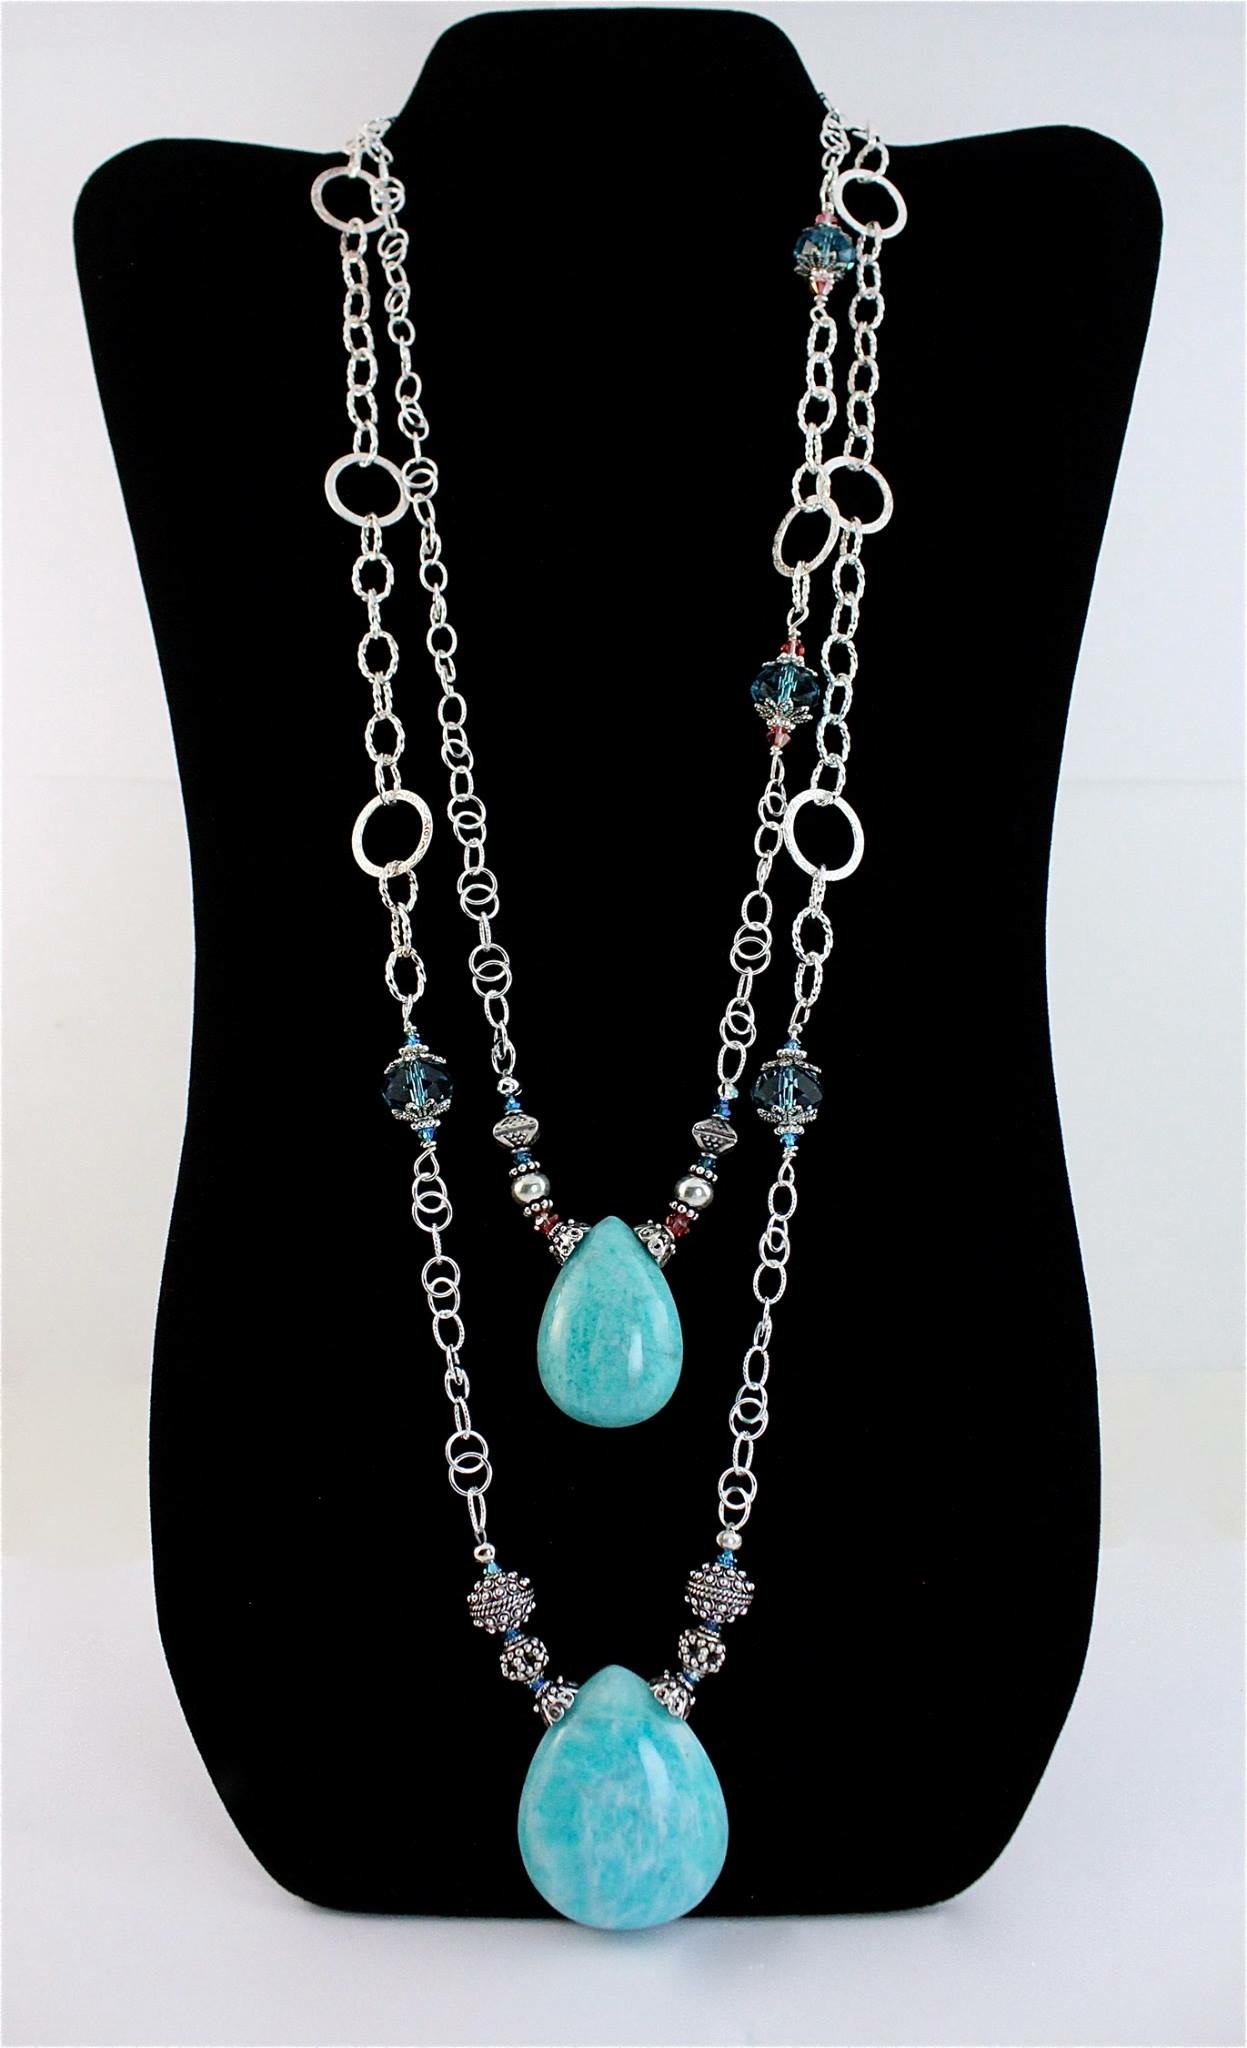 The Balanced Virgo and The Soothing Stone Necklace | Spitfire Designs